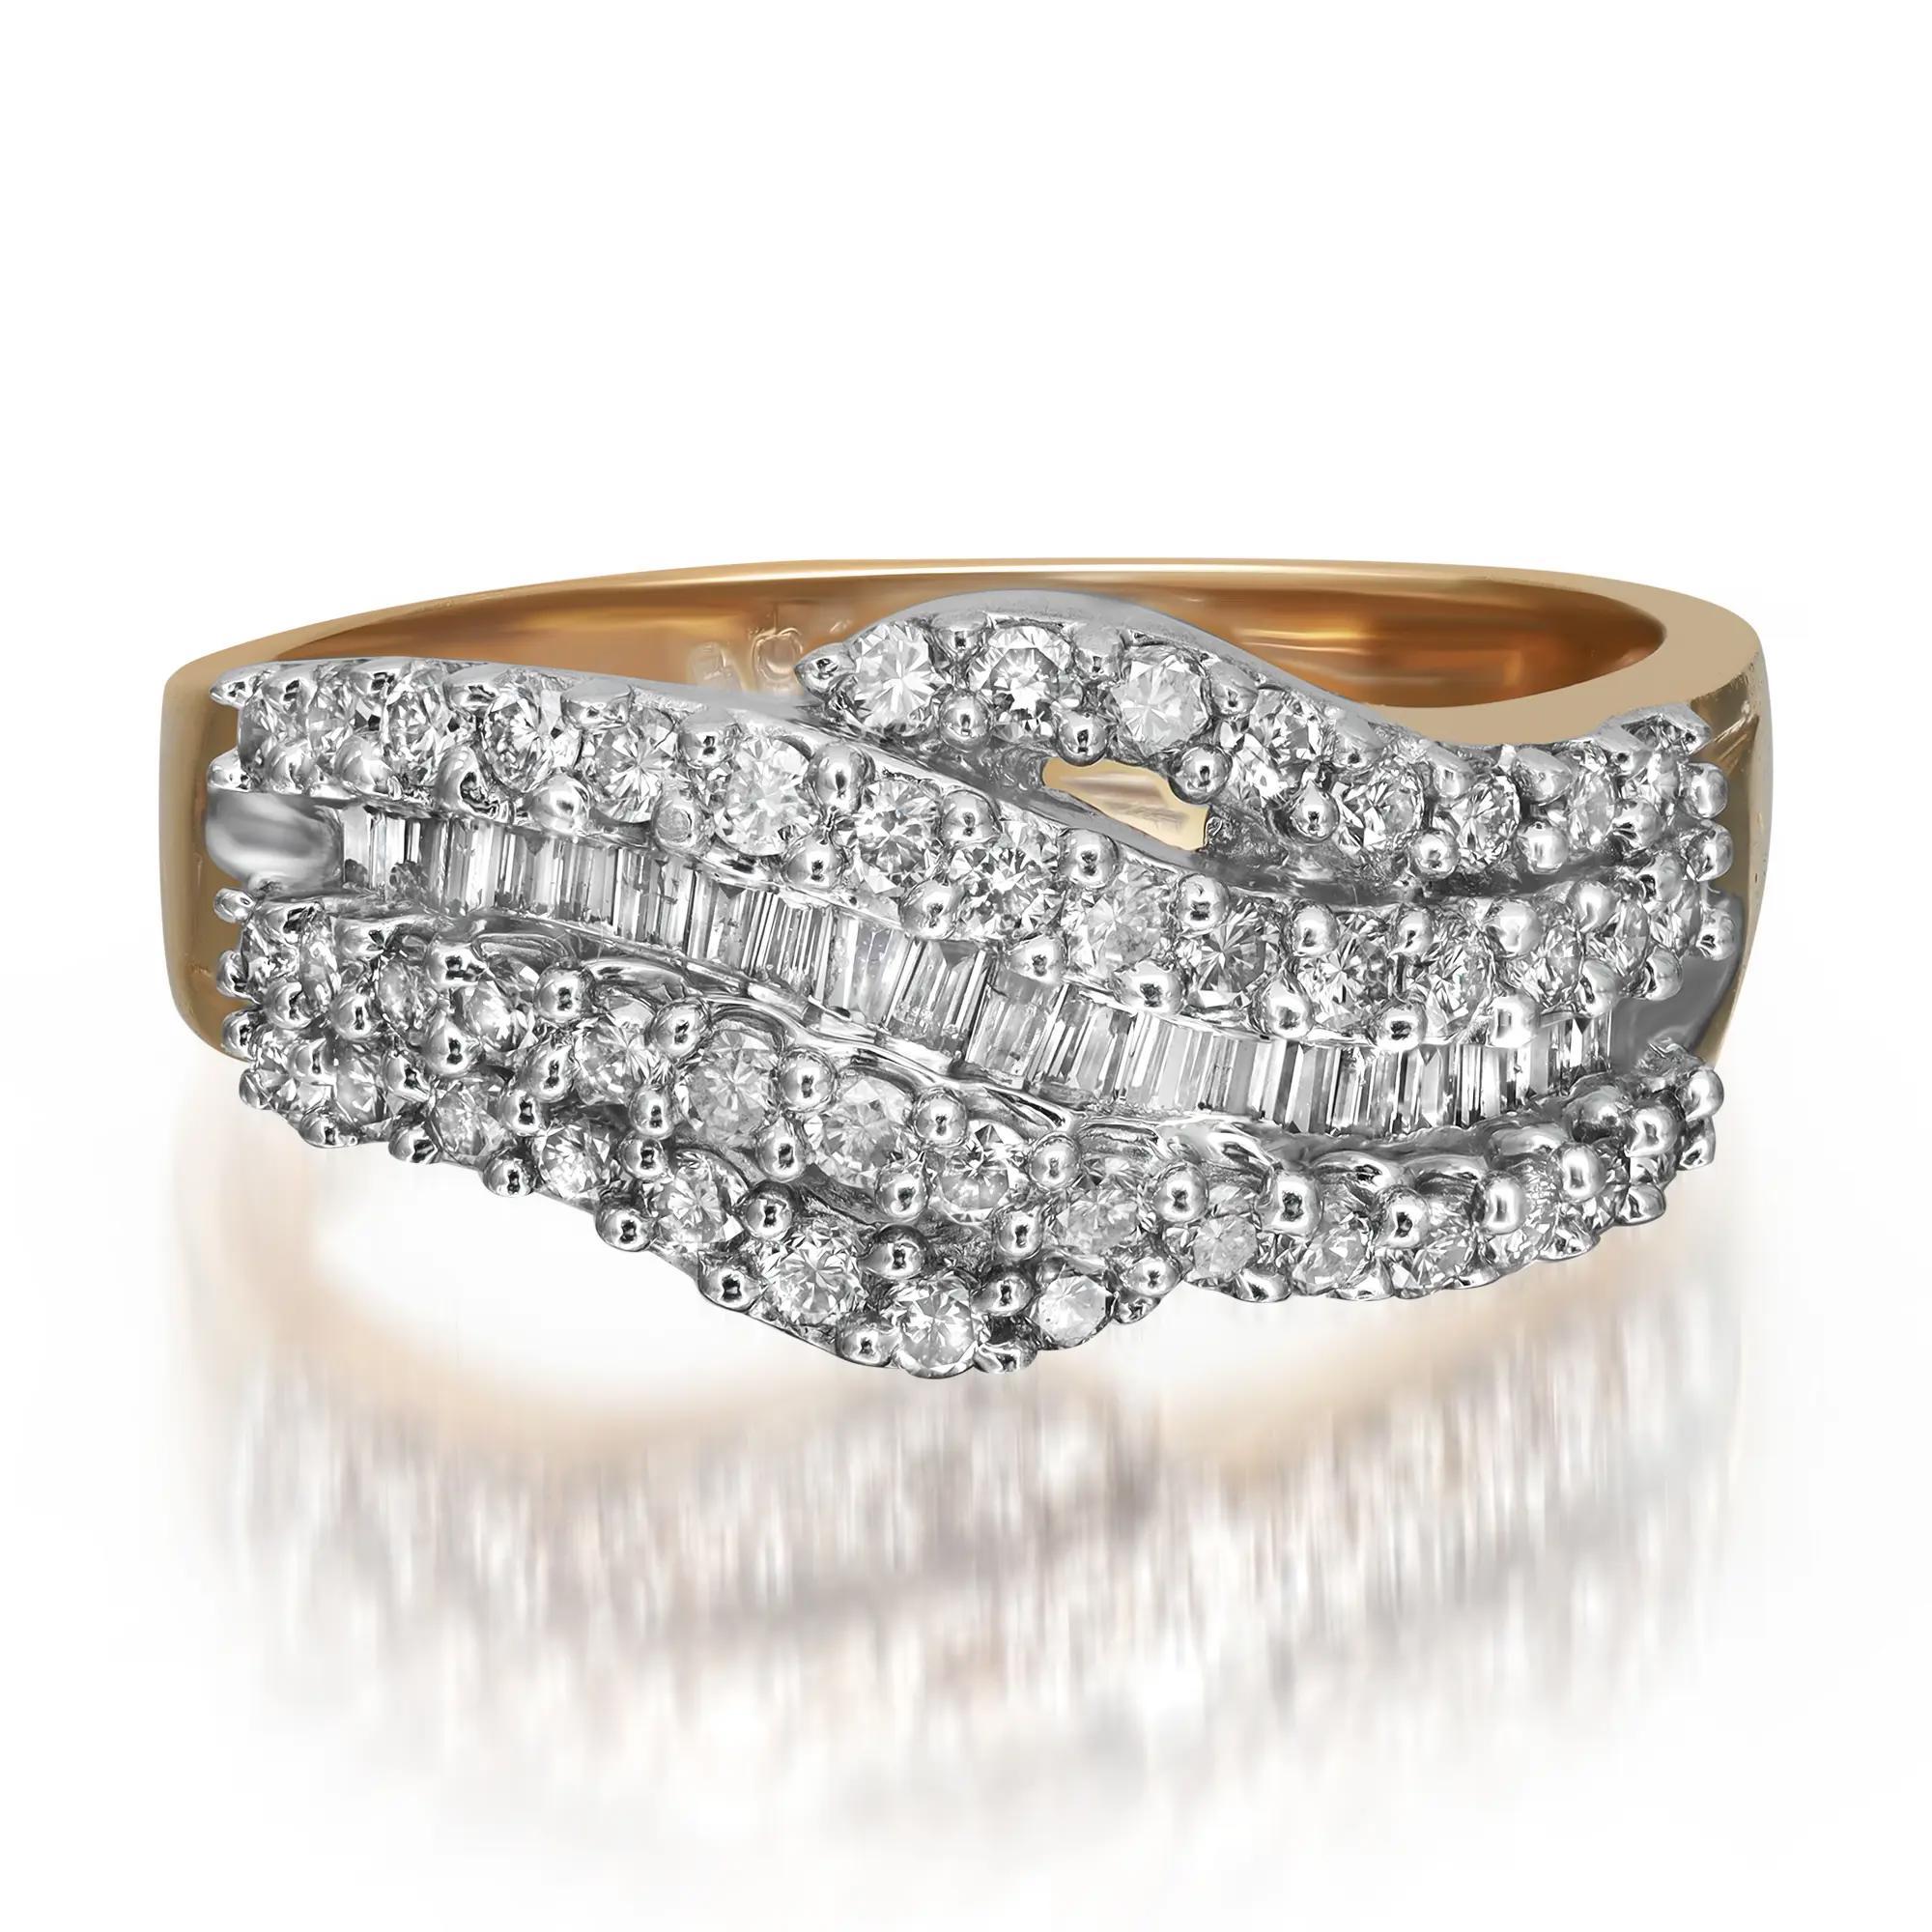 Beautiful and chic, natural diamond ladies cocktail ring crafted in 14k yellow gold. This fancy ring is highlighted with 0.22 carat of channel set baguette cut and 0.61 carat of prong set round cut dazzling diamonds with I color and SI1 clarity.